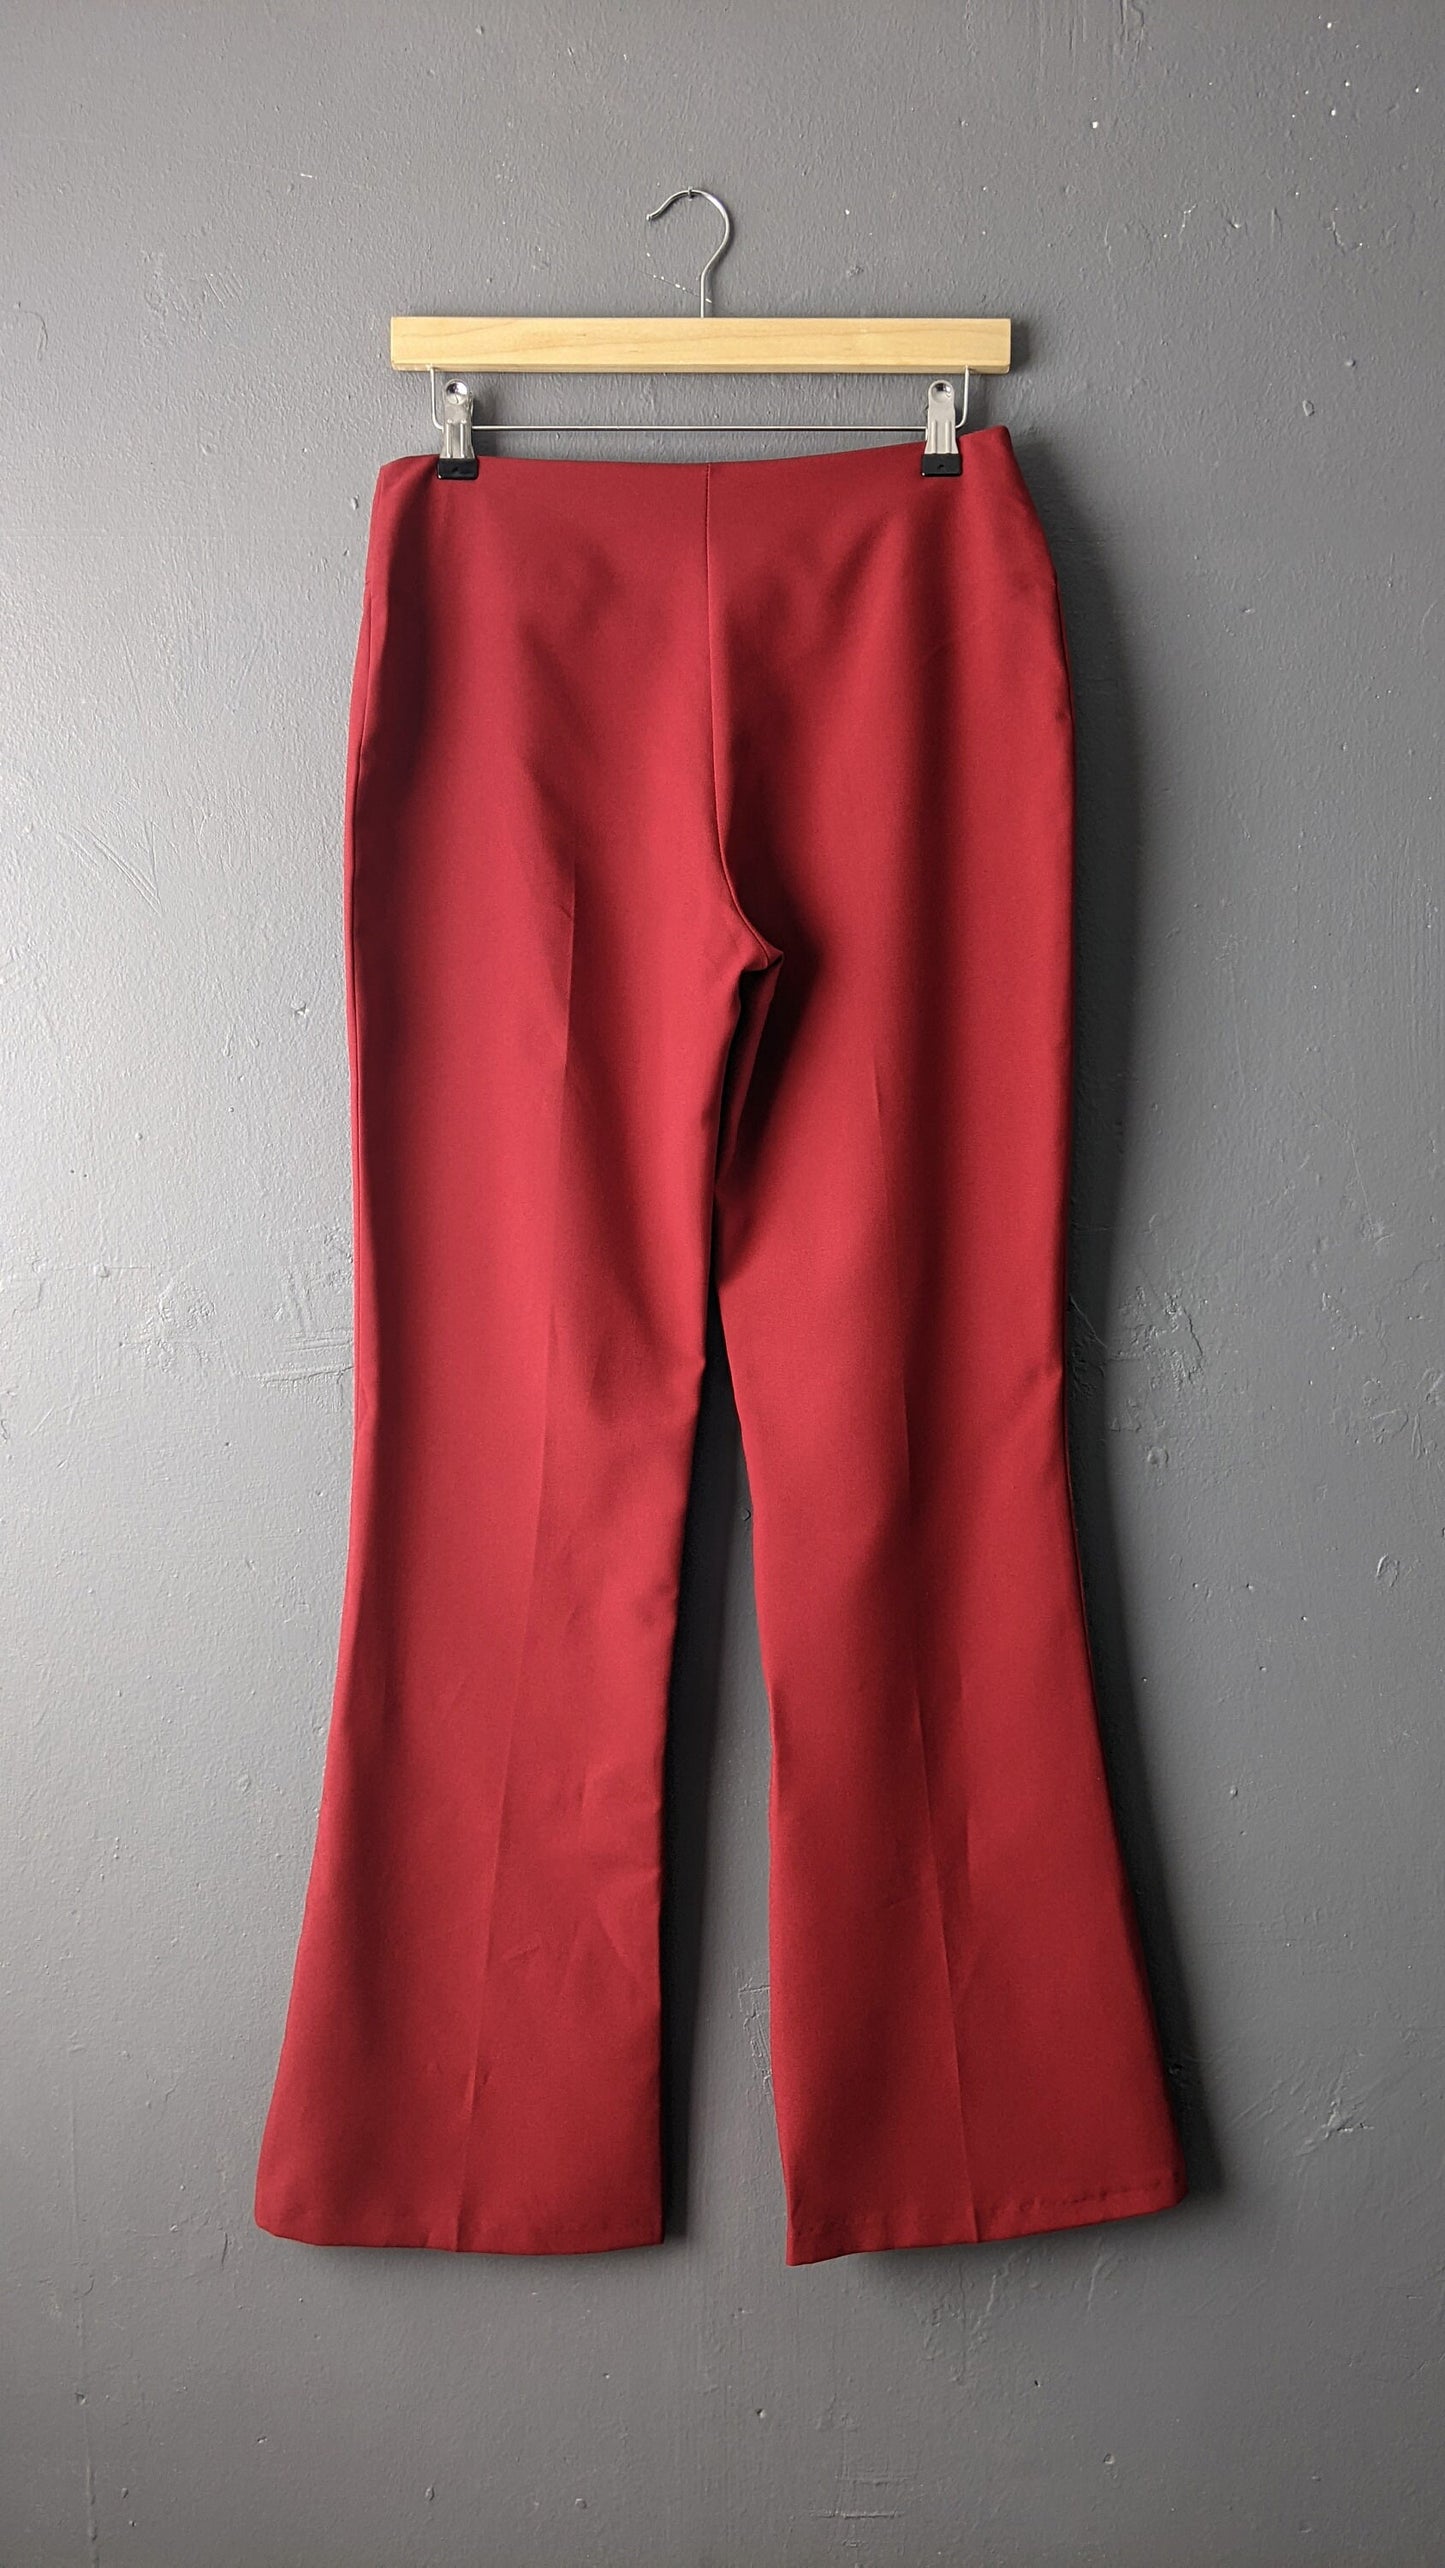 90s Deep Red Flared Trousers by Orsay, Low Rise Bootcut Wide Leg, Size Small Medium